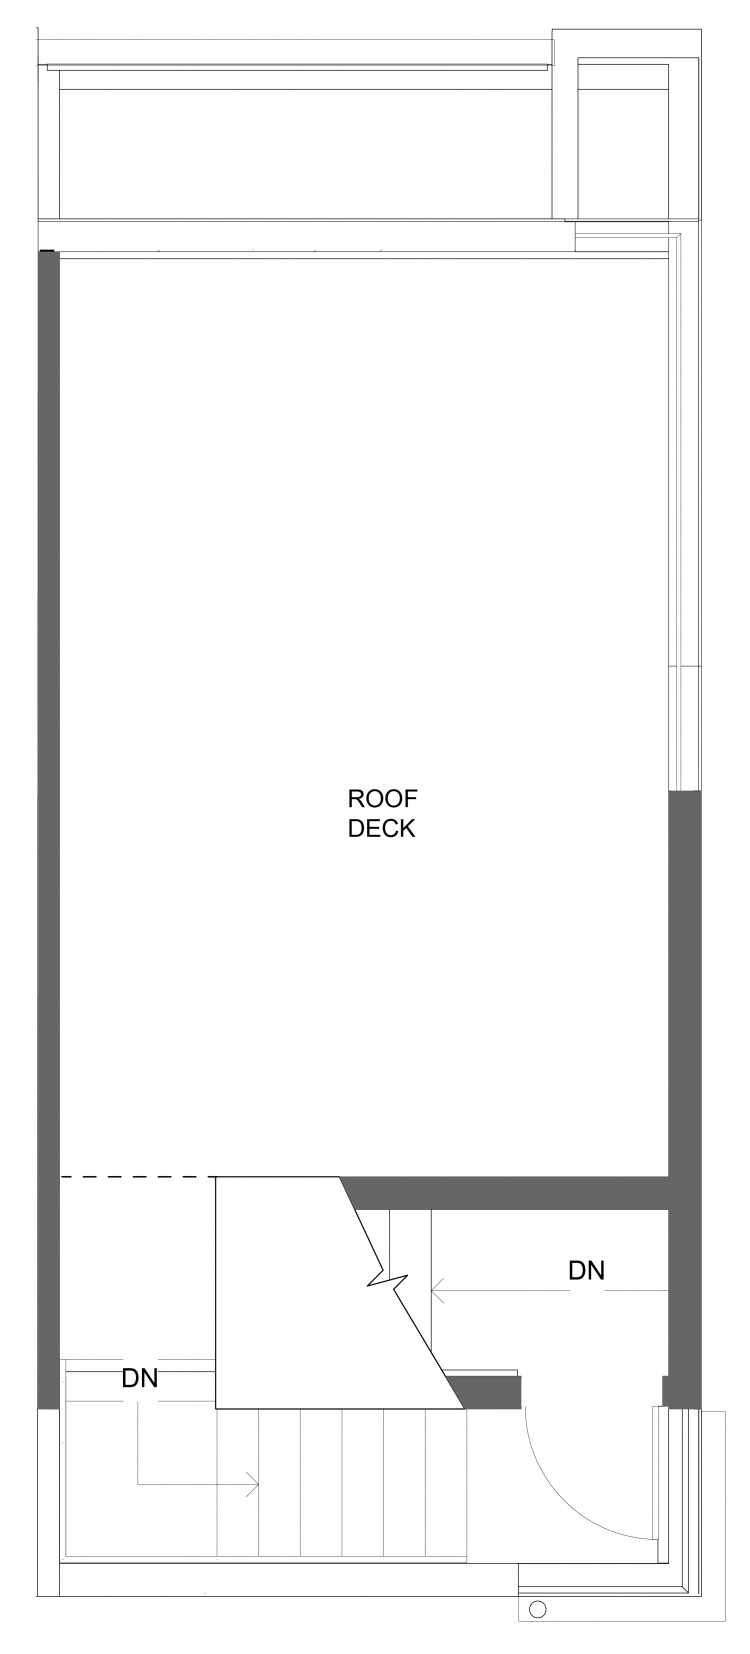 Roof Deck Floor Plan of 1539 Grandview Pl E, One of the Grandview Townhomes in Capitol Hill